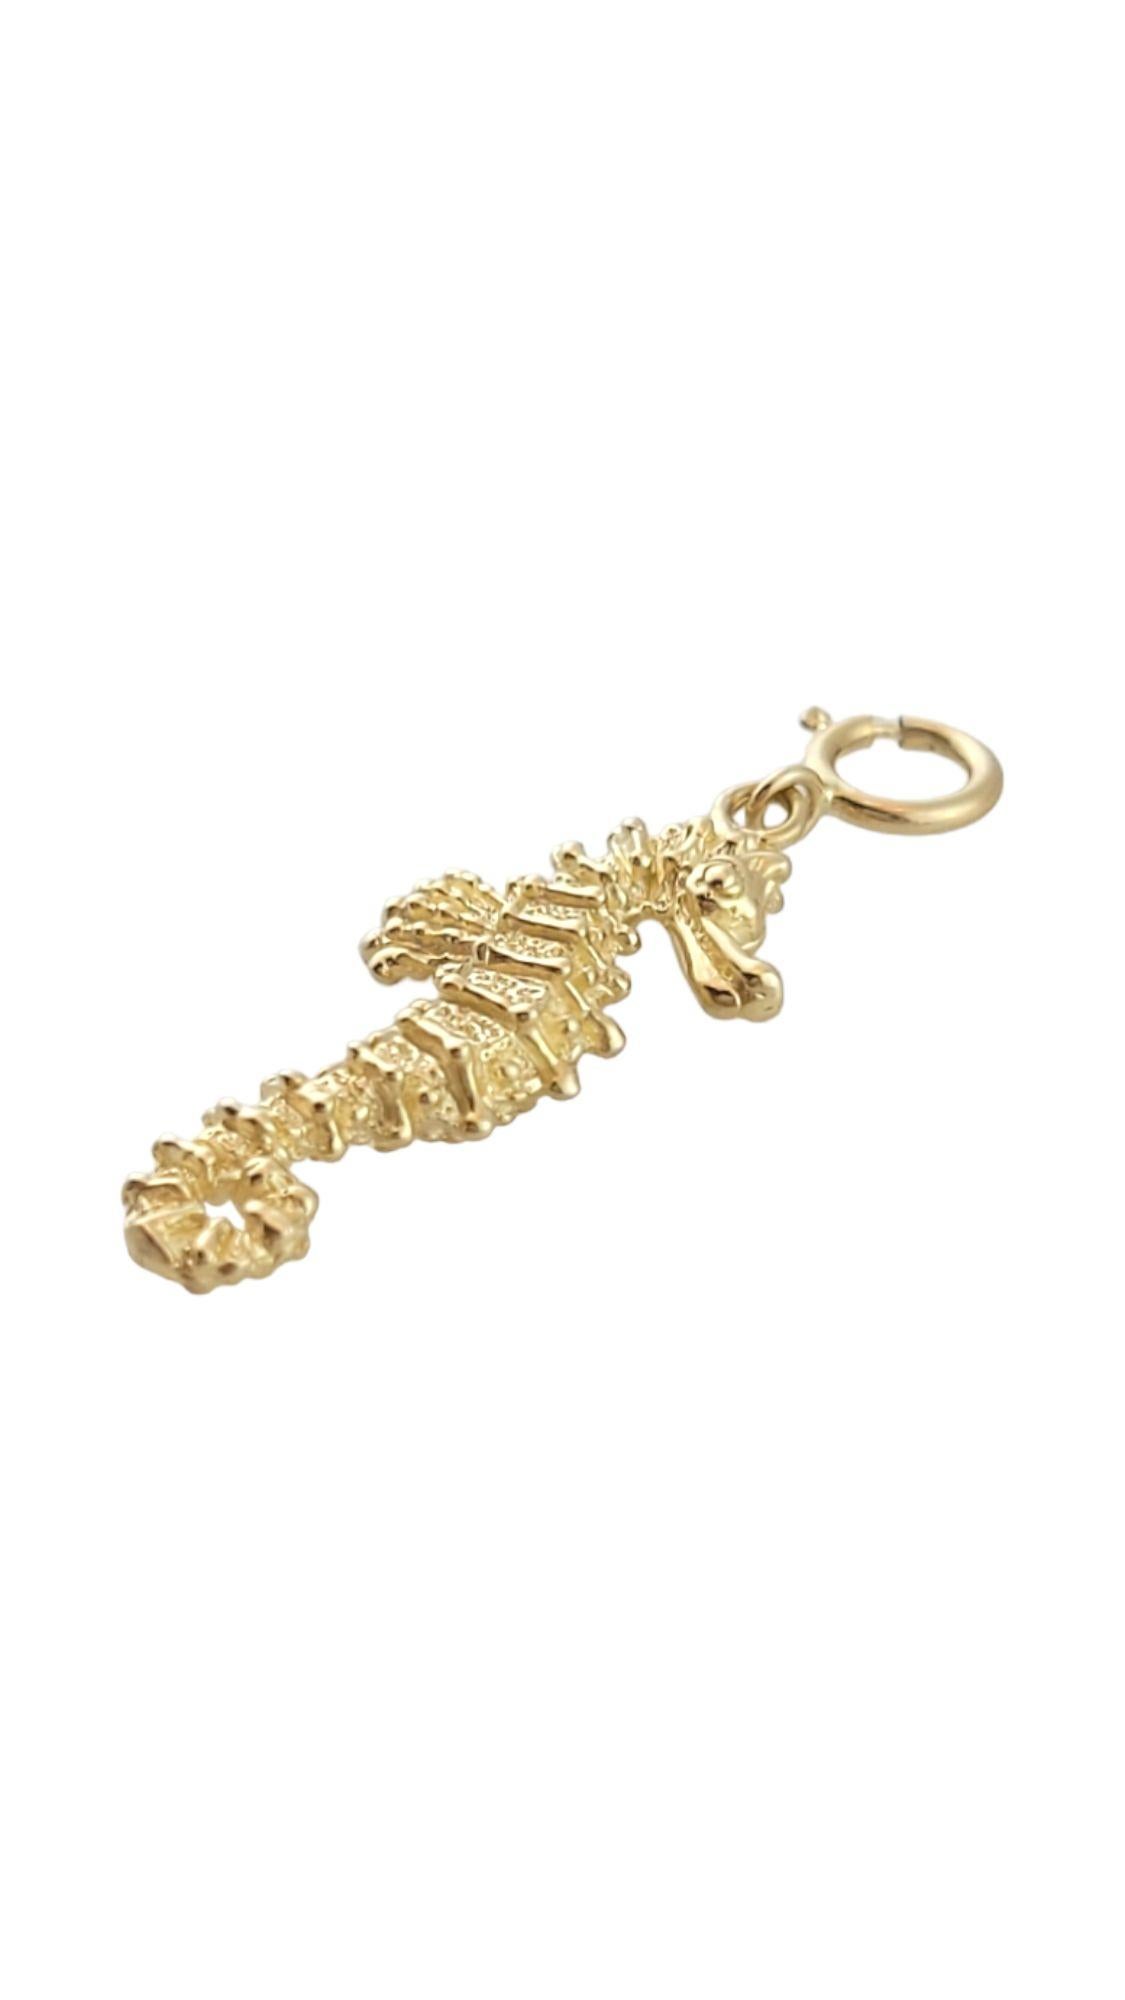 14K Yellow Gold Seahorse Charm #14295 In Good Condition For Sale In Washington Depot, CT